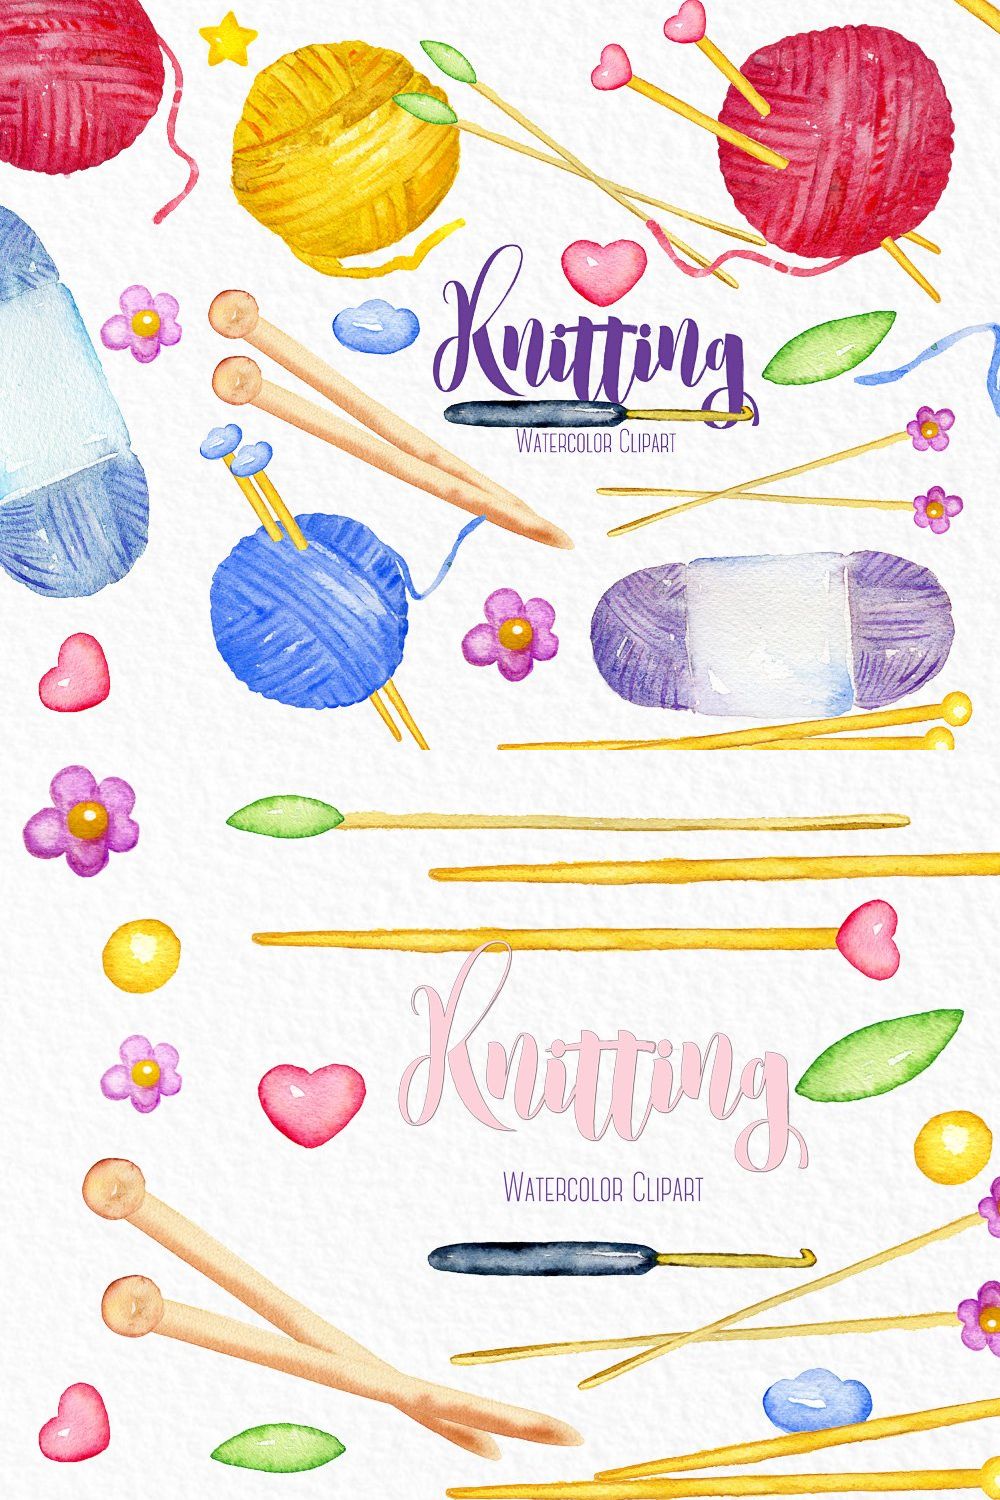 Knitting watercolor clipart pinterest preview image.